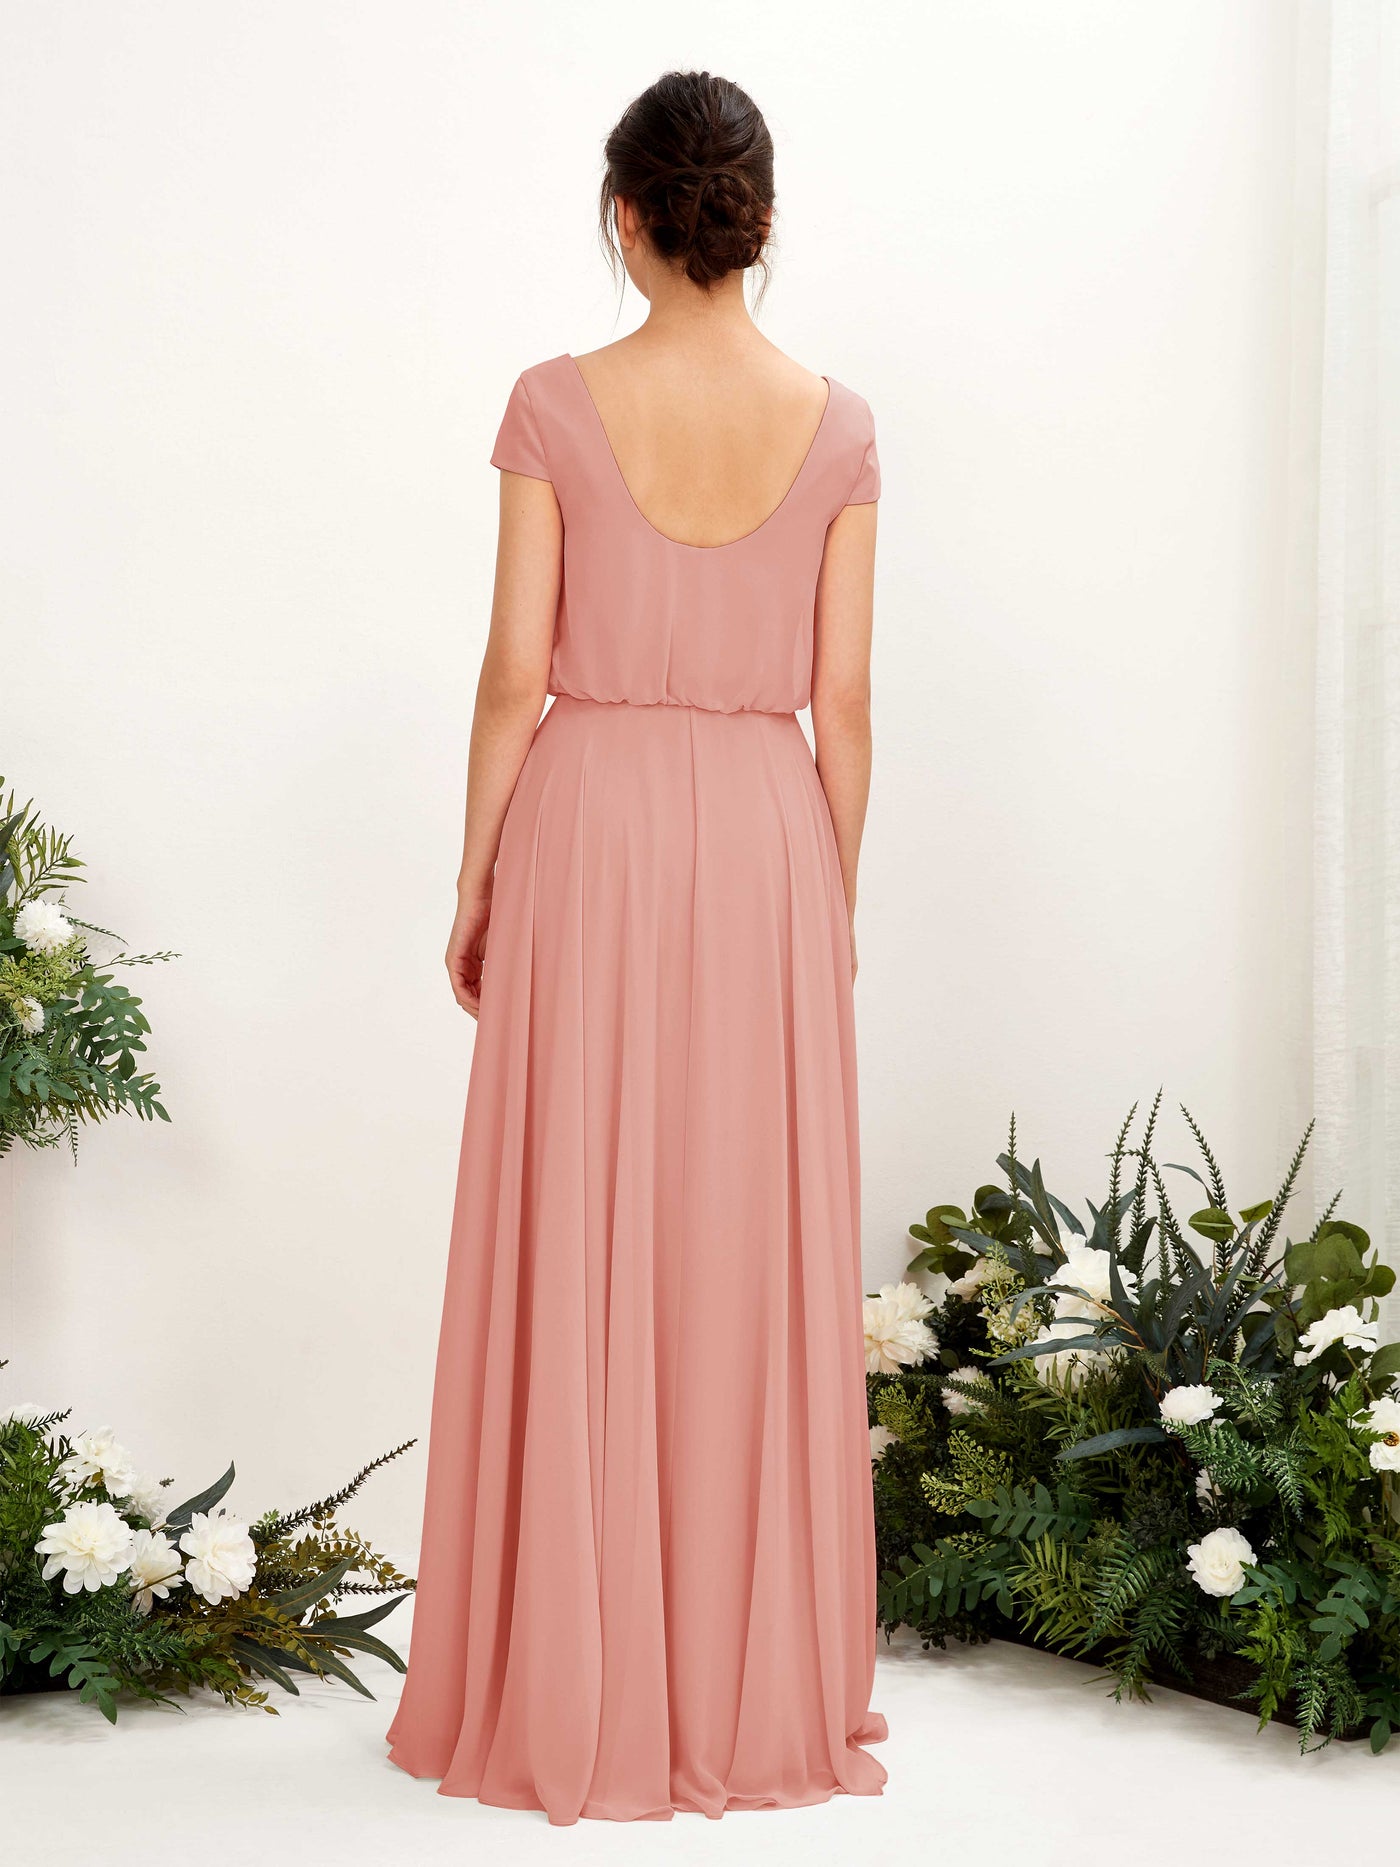 Champagne Rose Bridesmaid Dresses Bridesmaid Dress A-line Chiffon V-neck Full Length Short Sleeves Wedding Party Dress (81221806)#color_champagne-rose